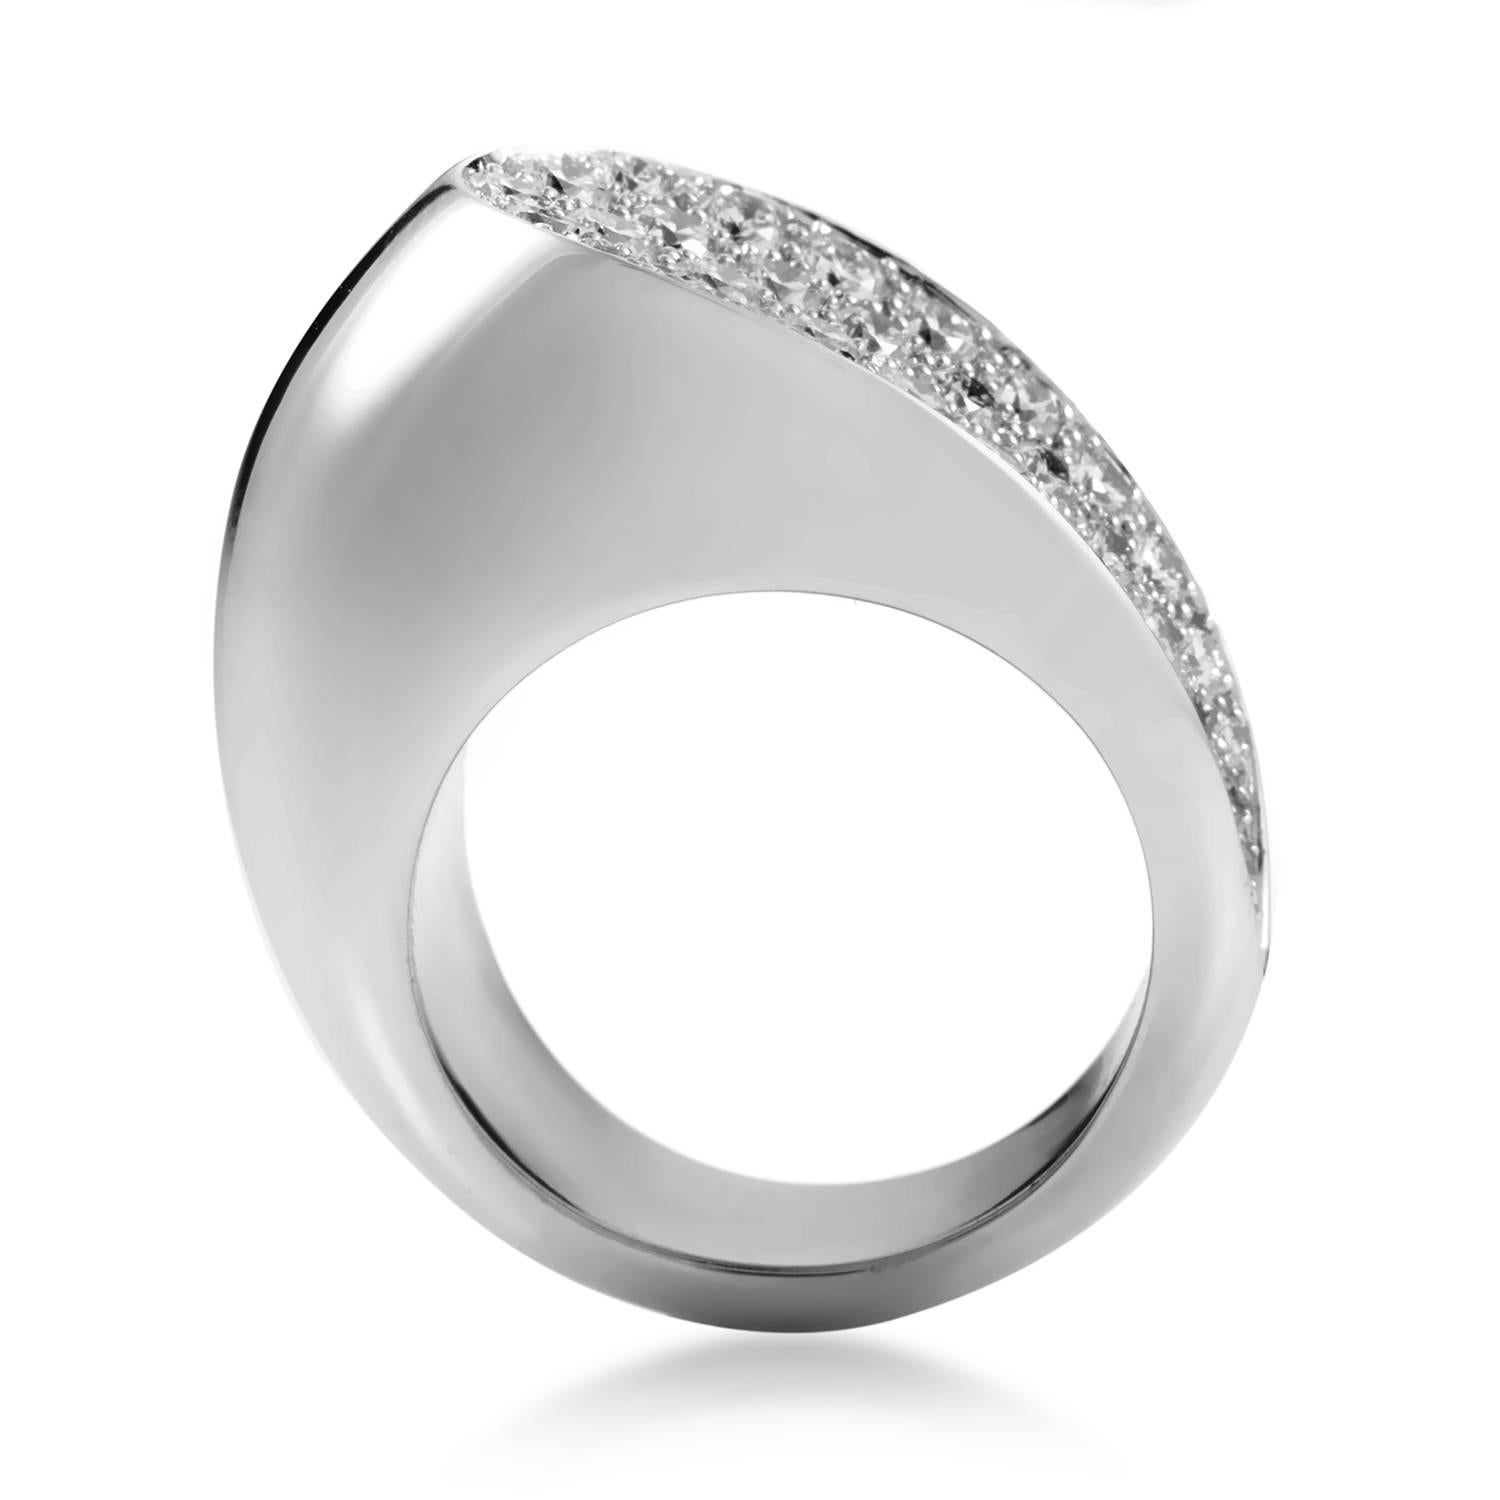 A pretty pave of white diamonds is the hallmark of this unique design from Fred of Paris. The ring is made of 18K white gold and is set with a 3.25ct micro-pave. 
Ring Size: 8.0(56)
Ring Top Dimensions: 22 x 18mm
Band Thickness: 7 mm
Ring Top